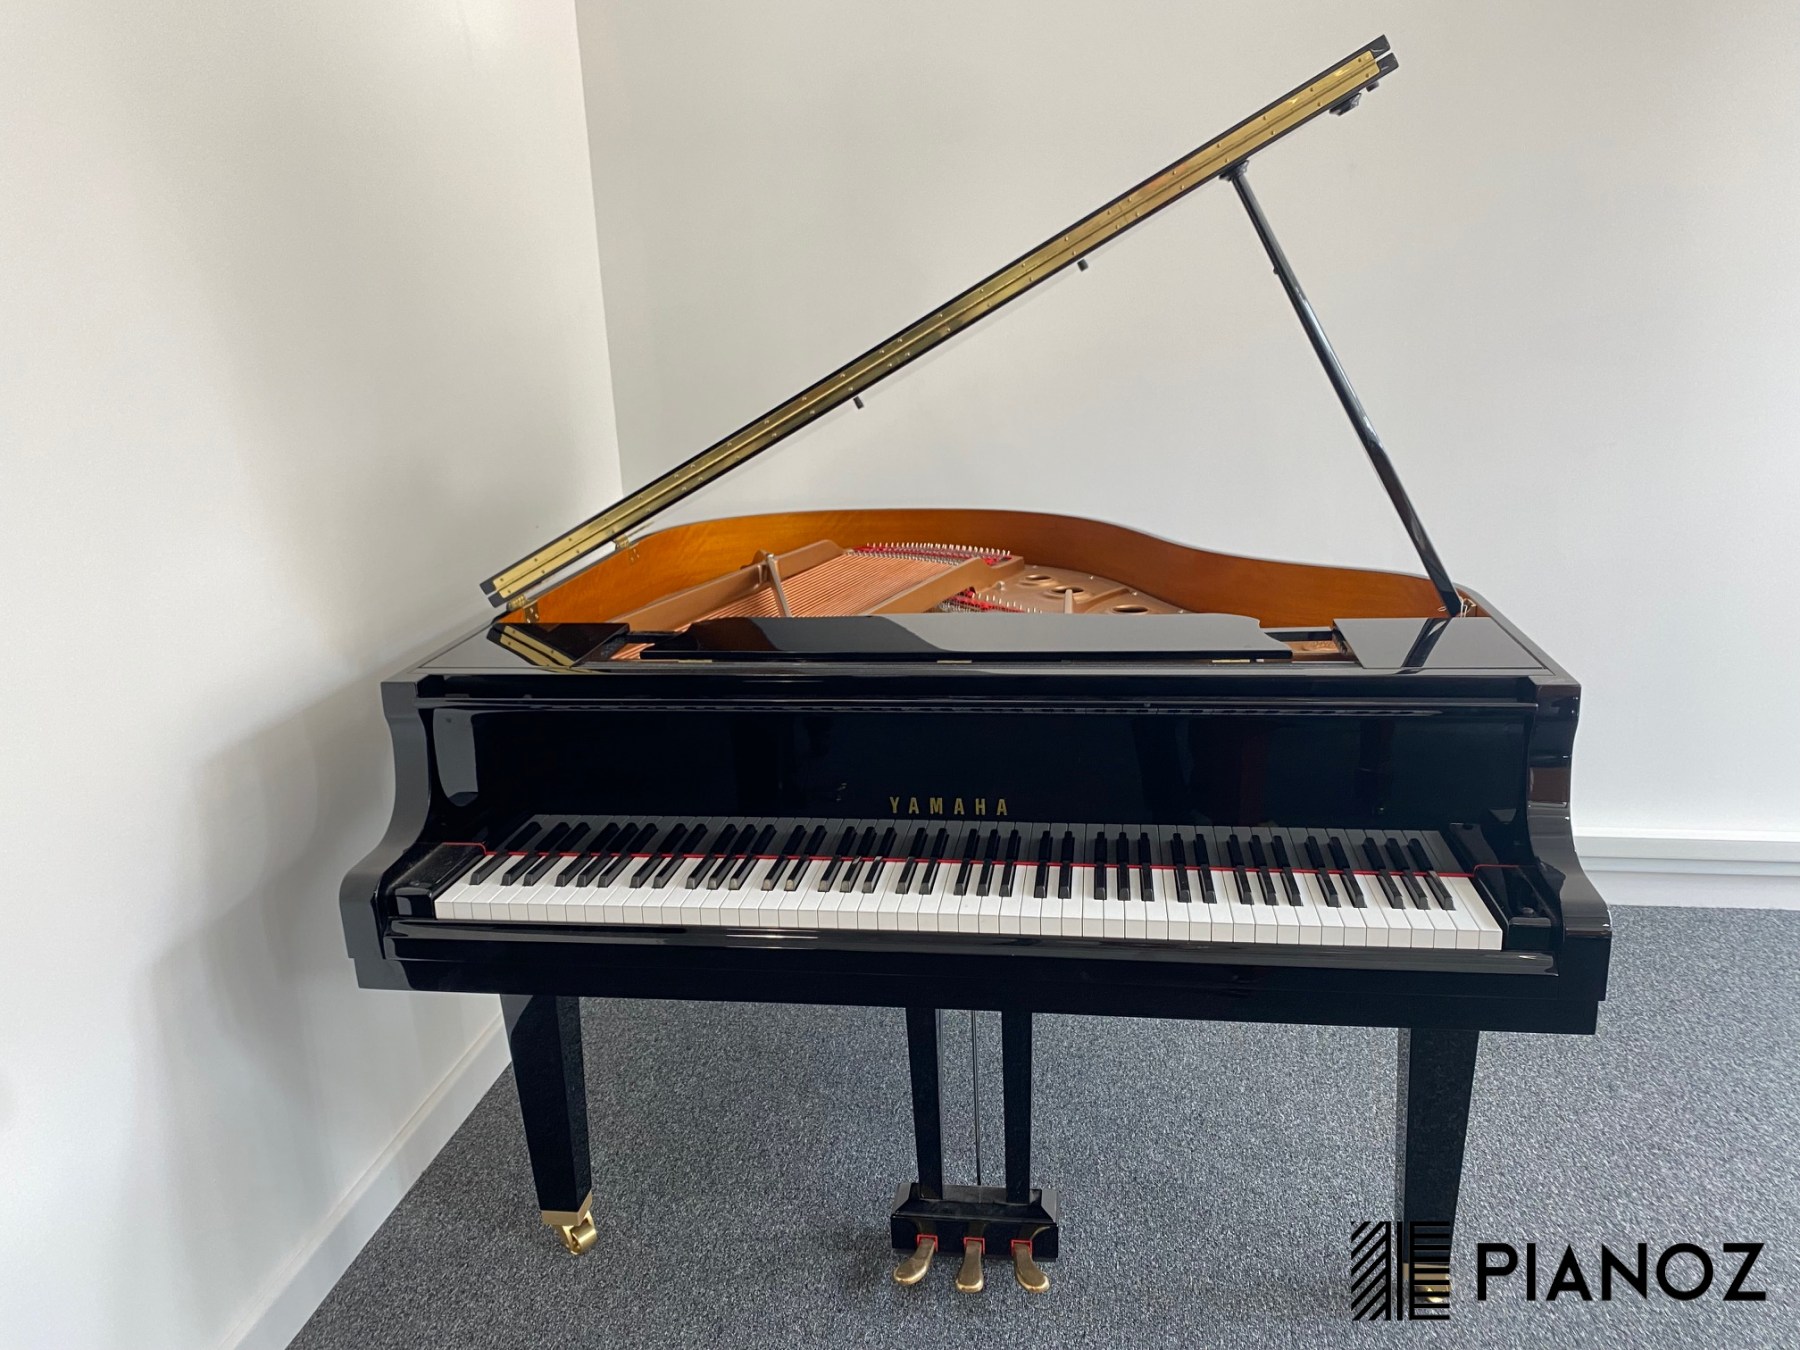 Yamaha GB1 Disklavier Self Playing Baby Grand Piano piano for sale in UK